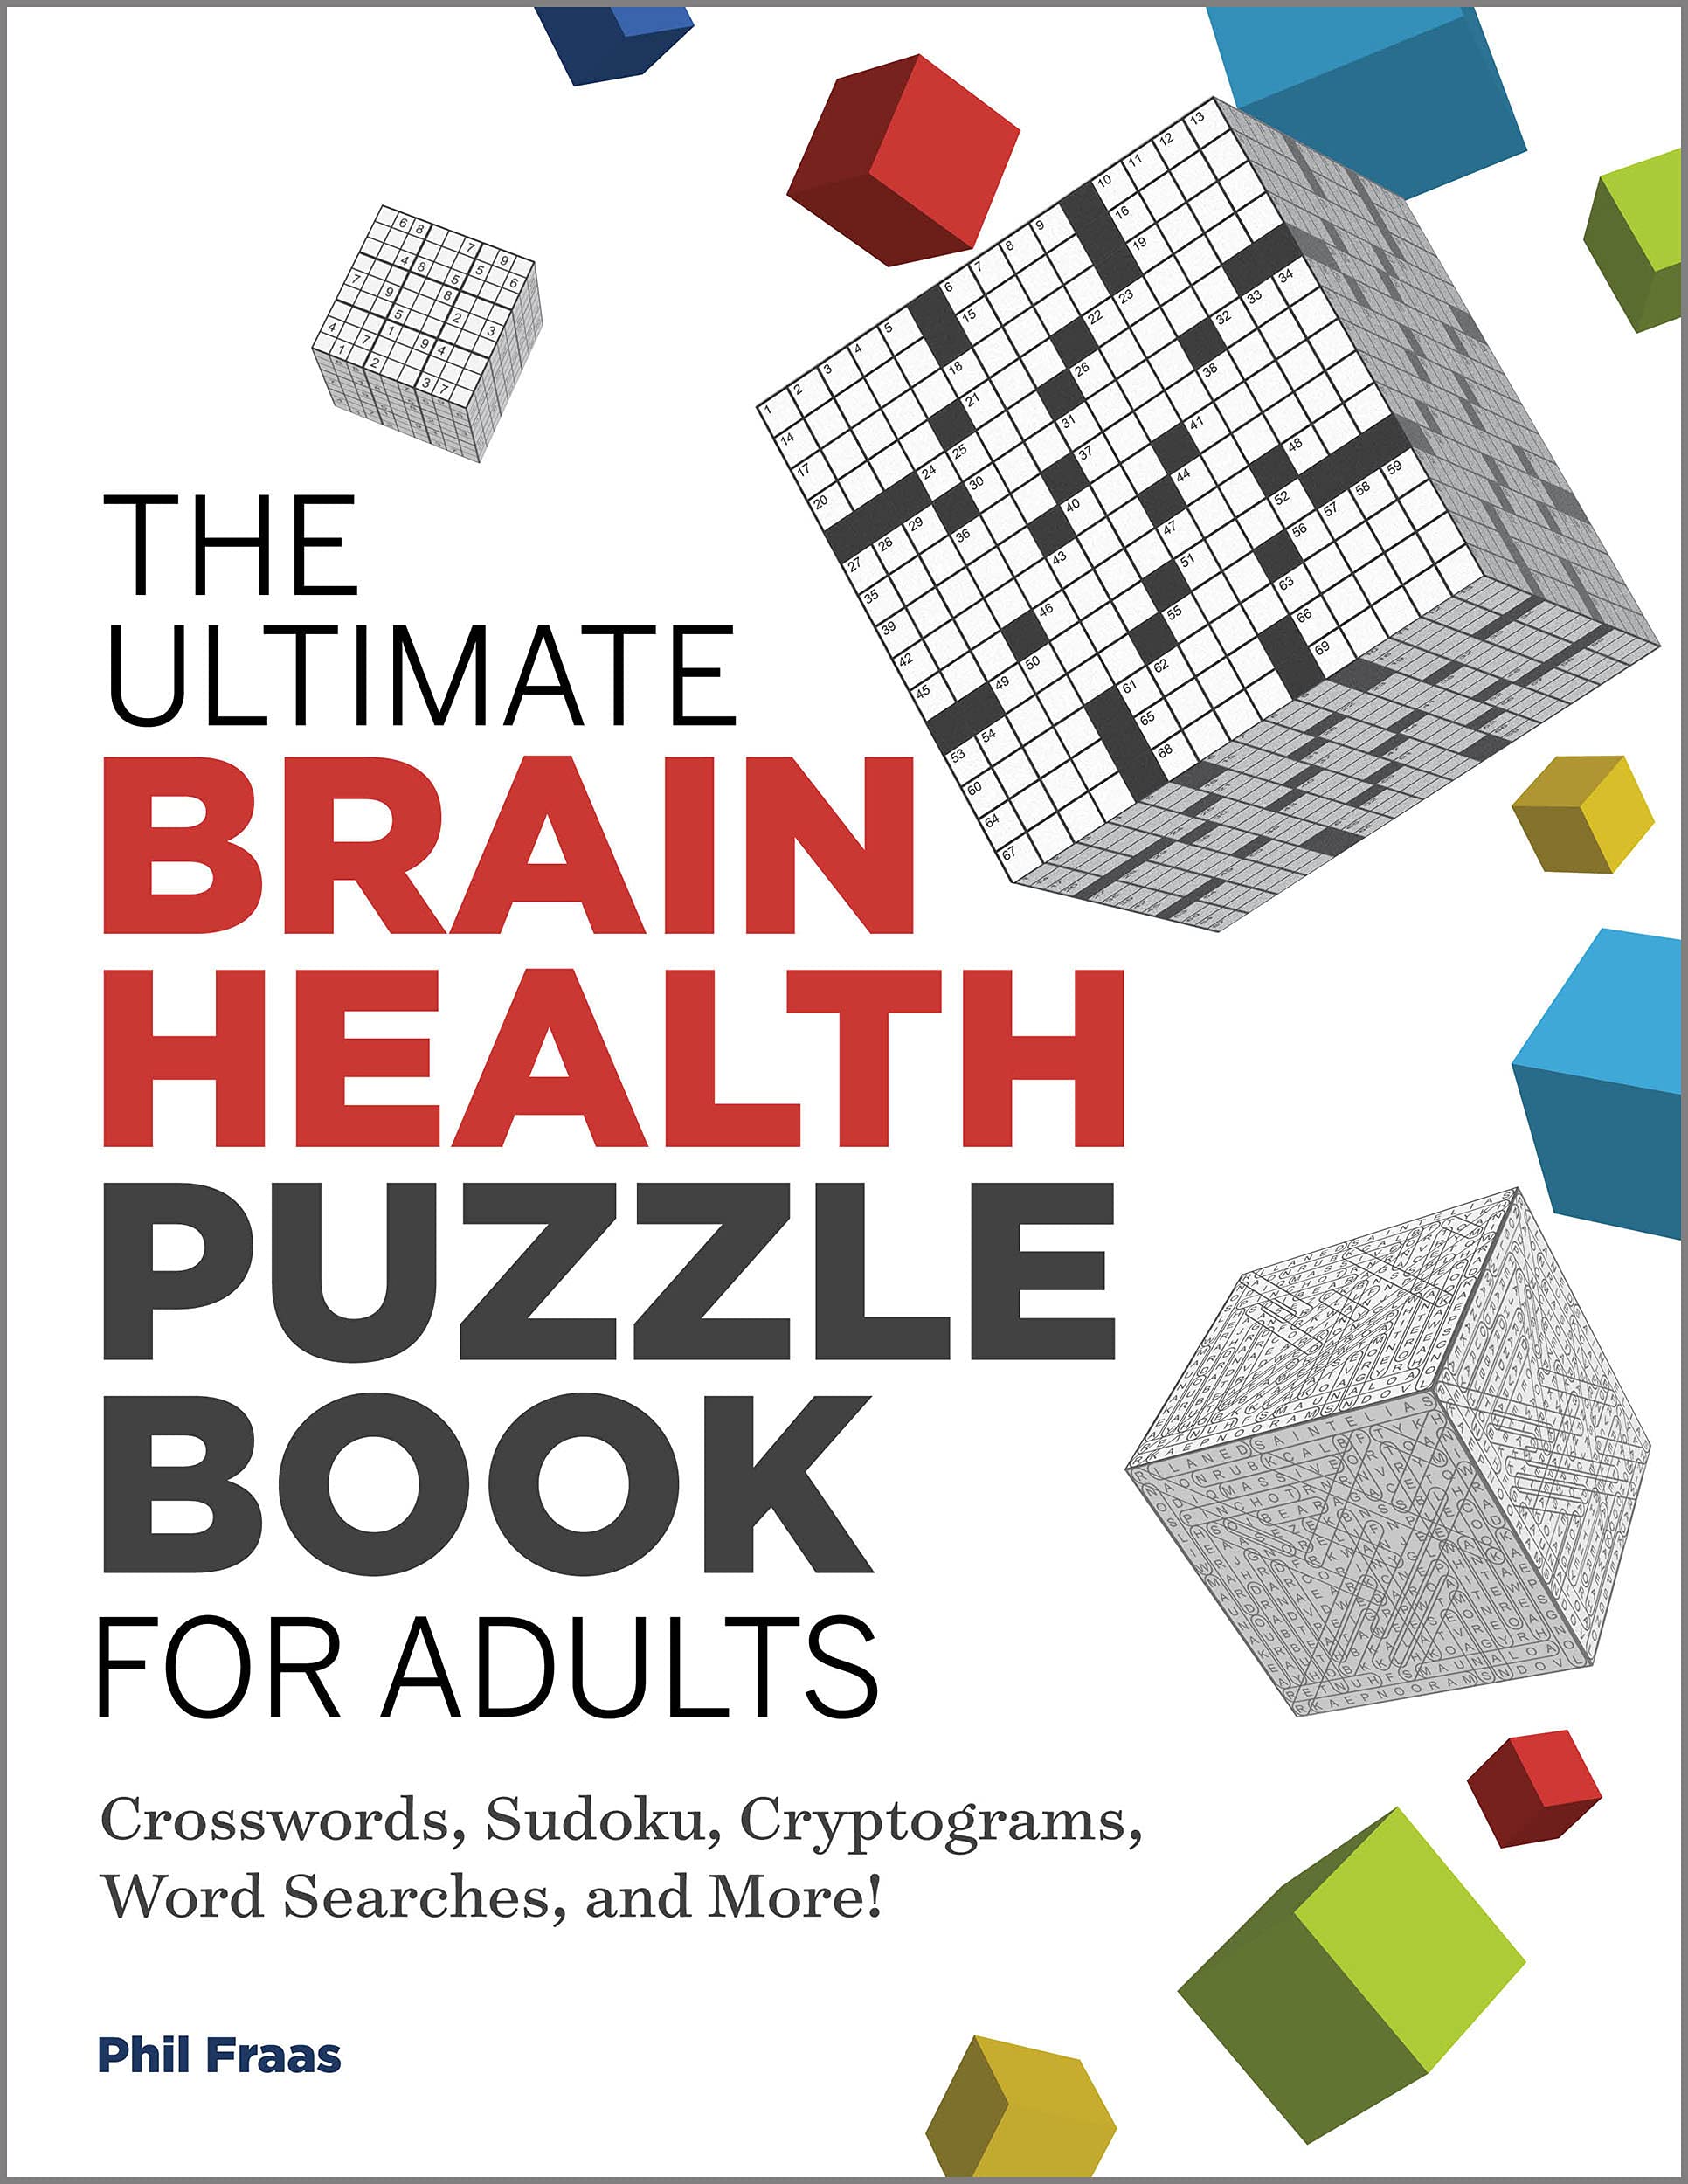 The Ultimate Brain Health Puzzle Book for Adults: Crosswords, Sudoku, Cryptograms, Word Searches, and More! (Ultimate Brain Health Puzzle Books) - SureShot Books Publishing LLC